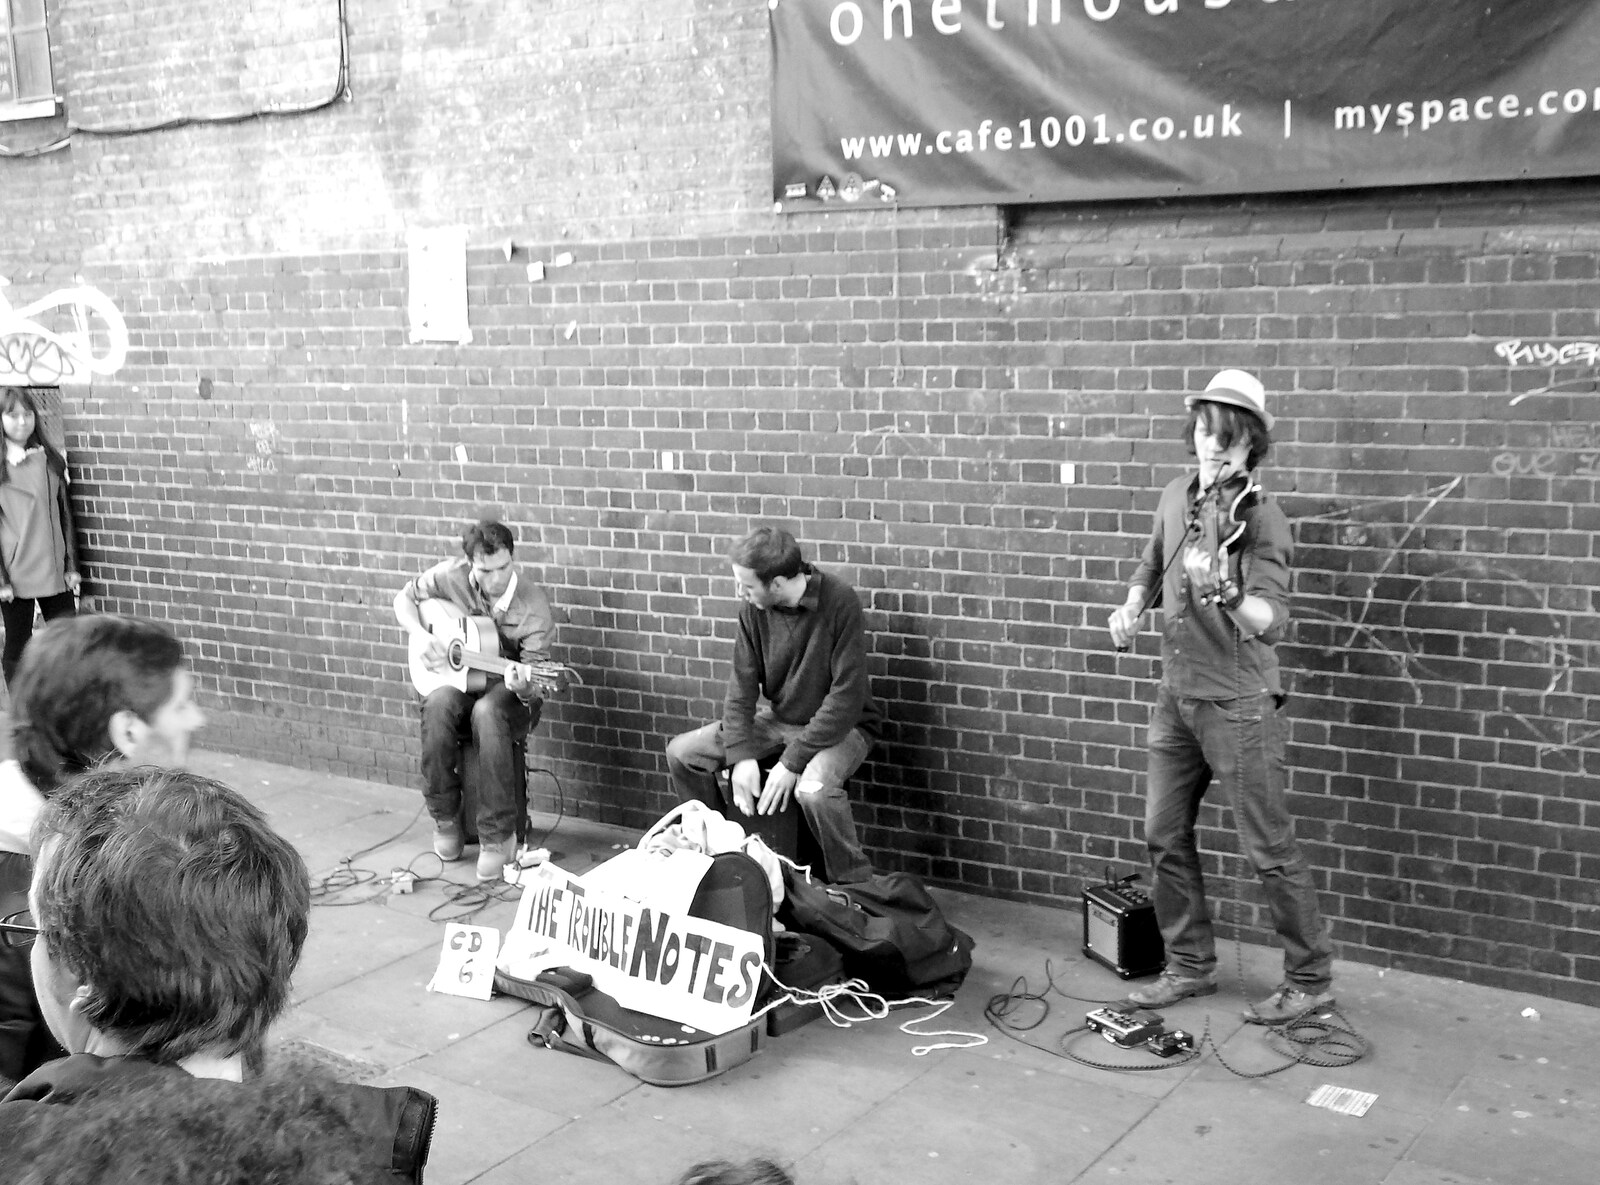 The Trouble Notes play on Brick Lane from Lunch in the East End, Spitalfields and Brick Lane, London - 1st December 2013